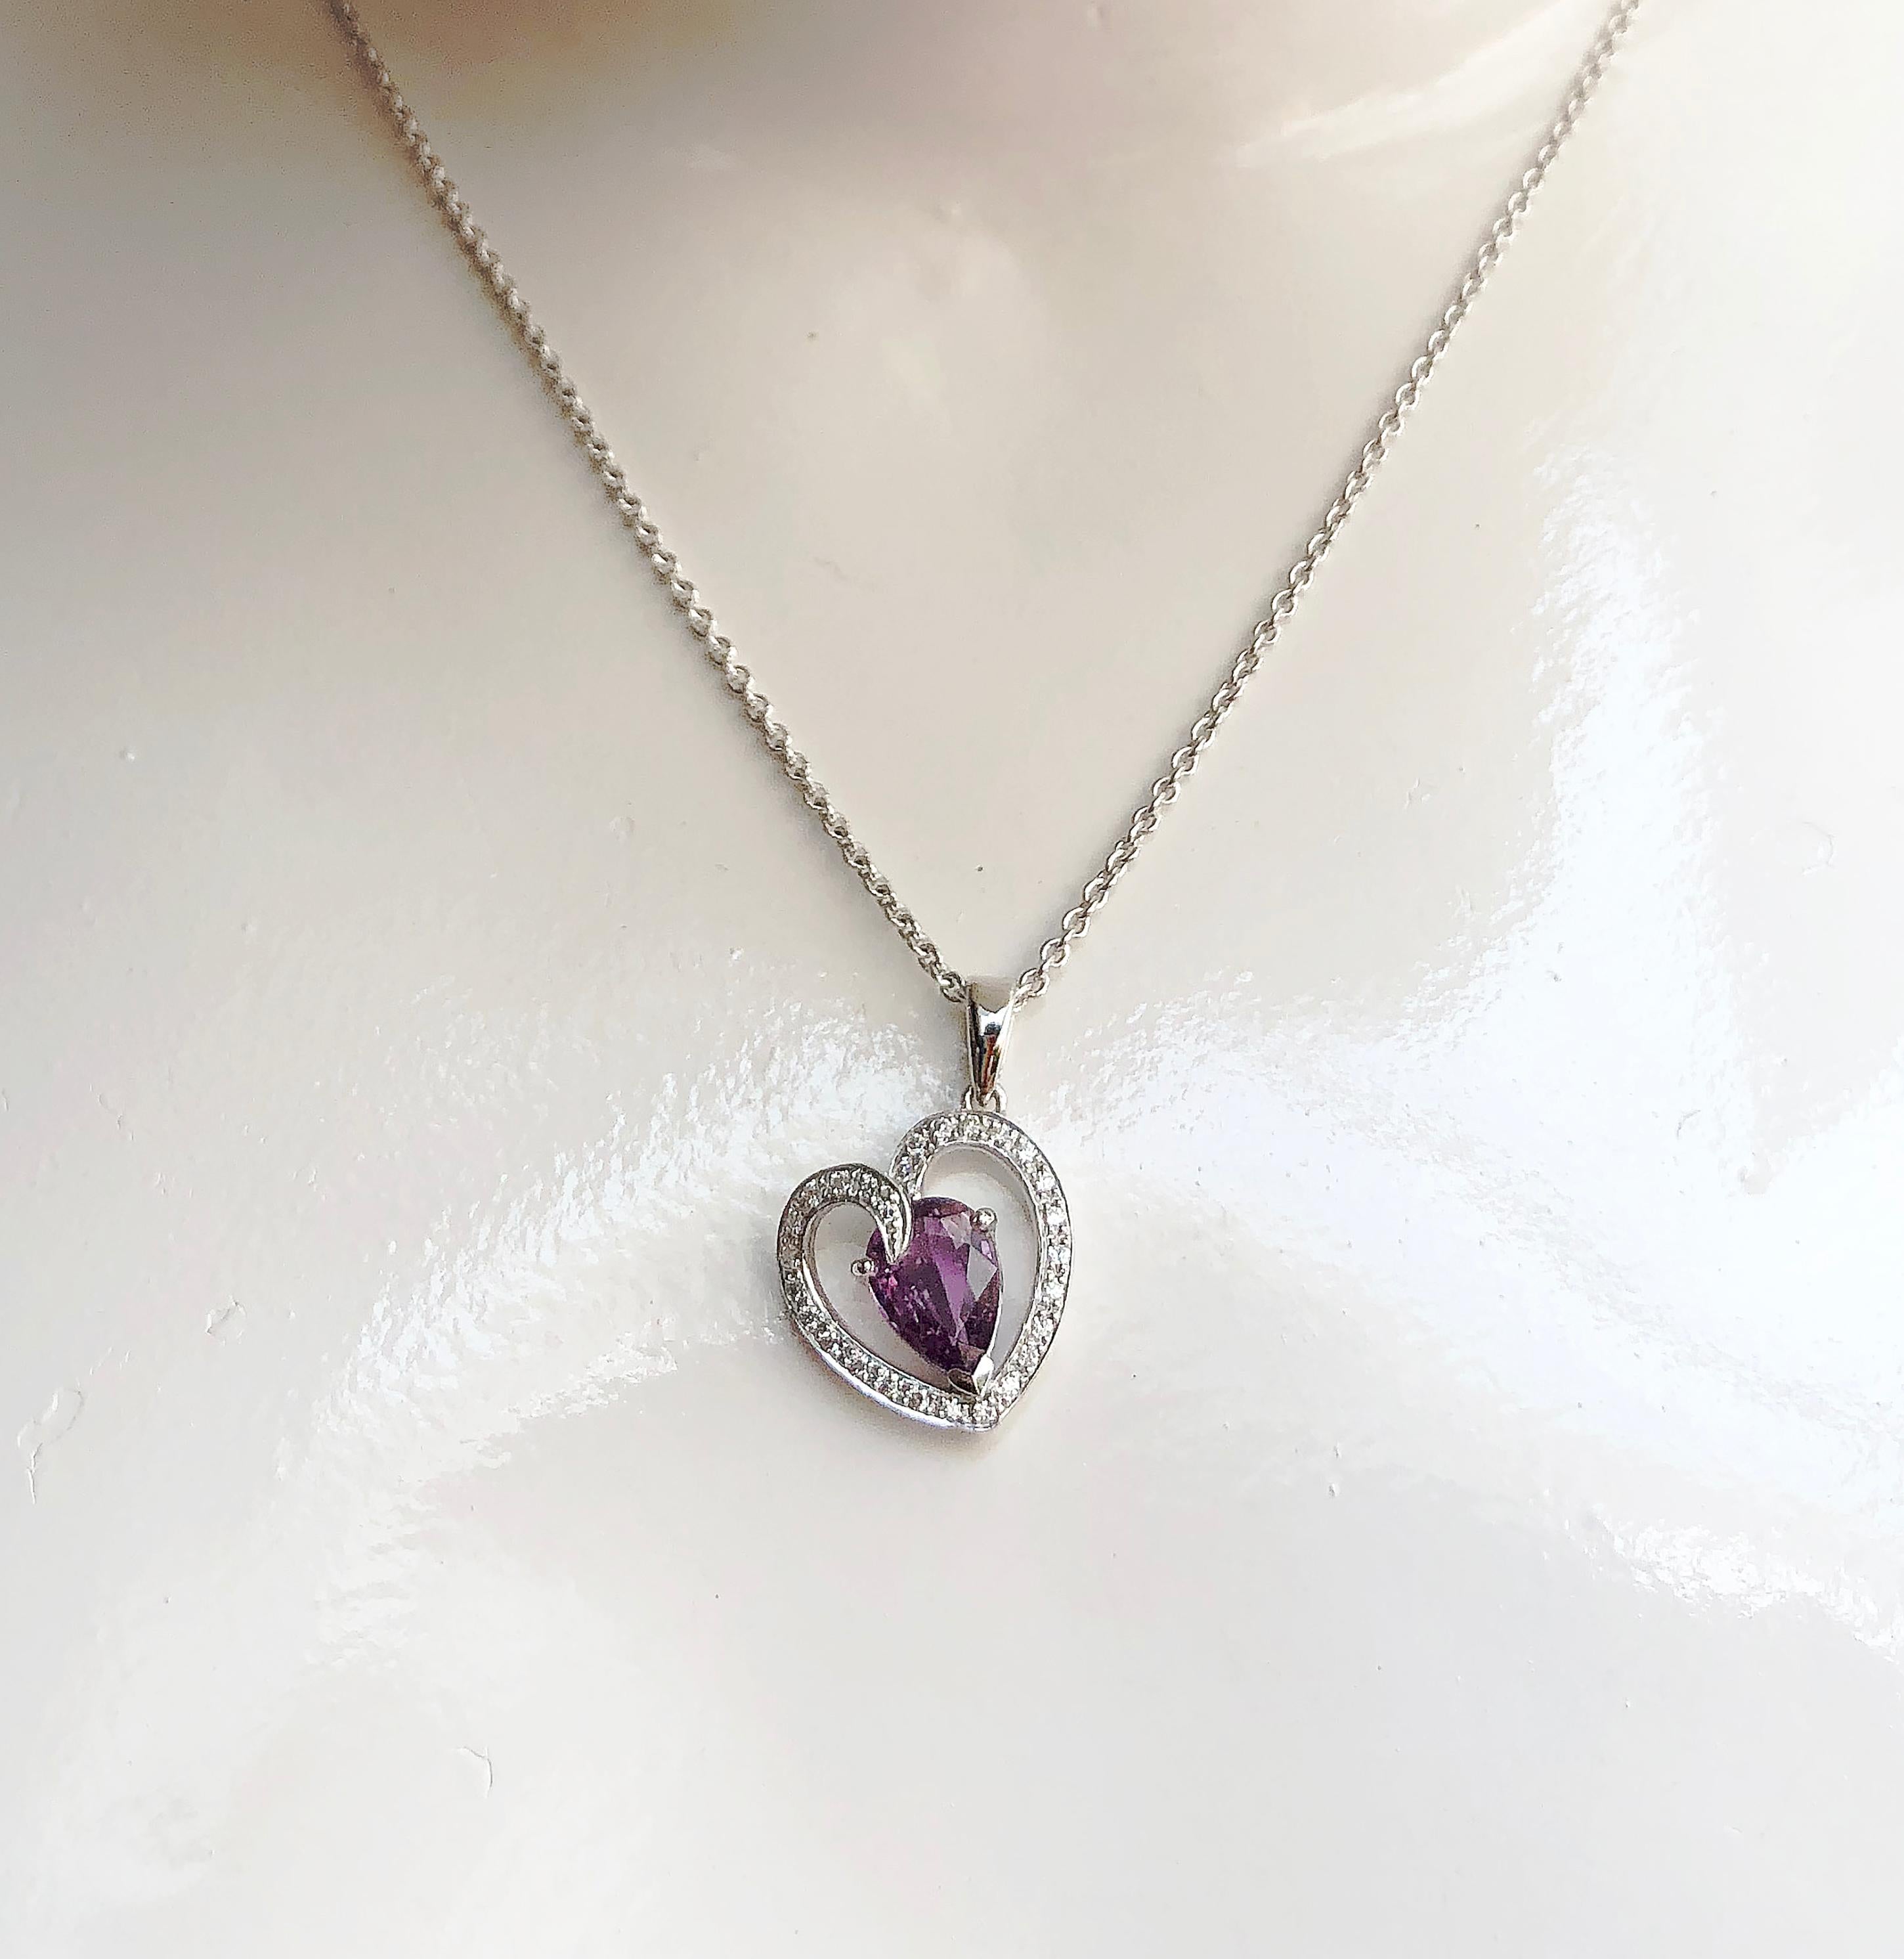 Purple Sapphire 1.35 carats with Diamond 0.13 carat Pendant set in 18 Karat White Gold Settings
(chain not included)

Width: 1.5 cm
Length: 2 cm 

